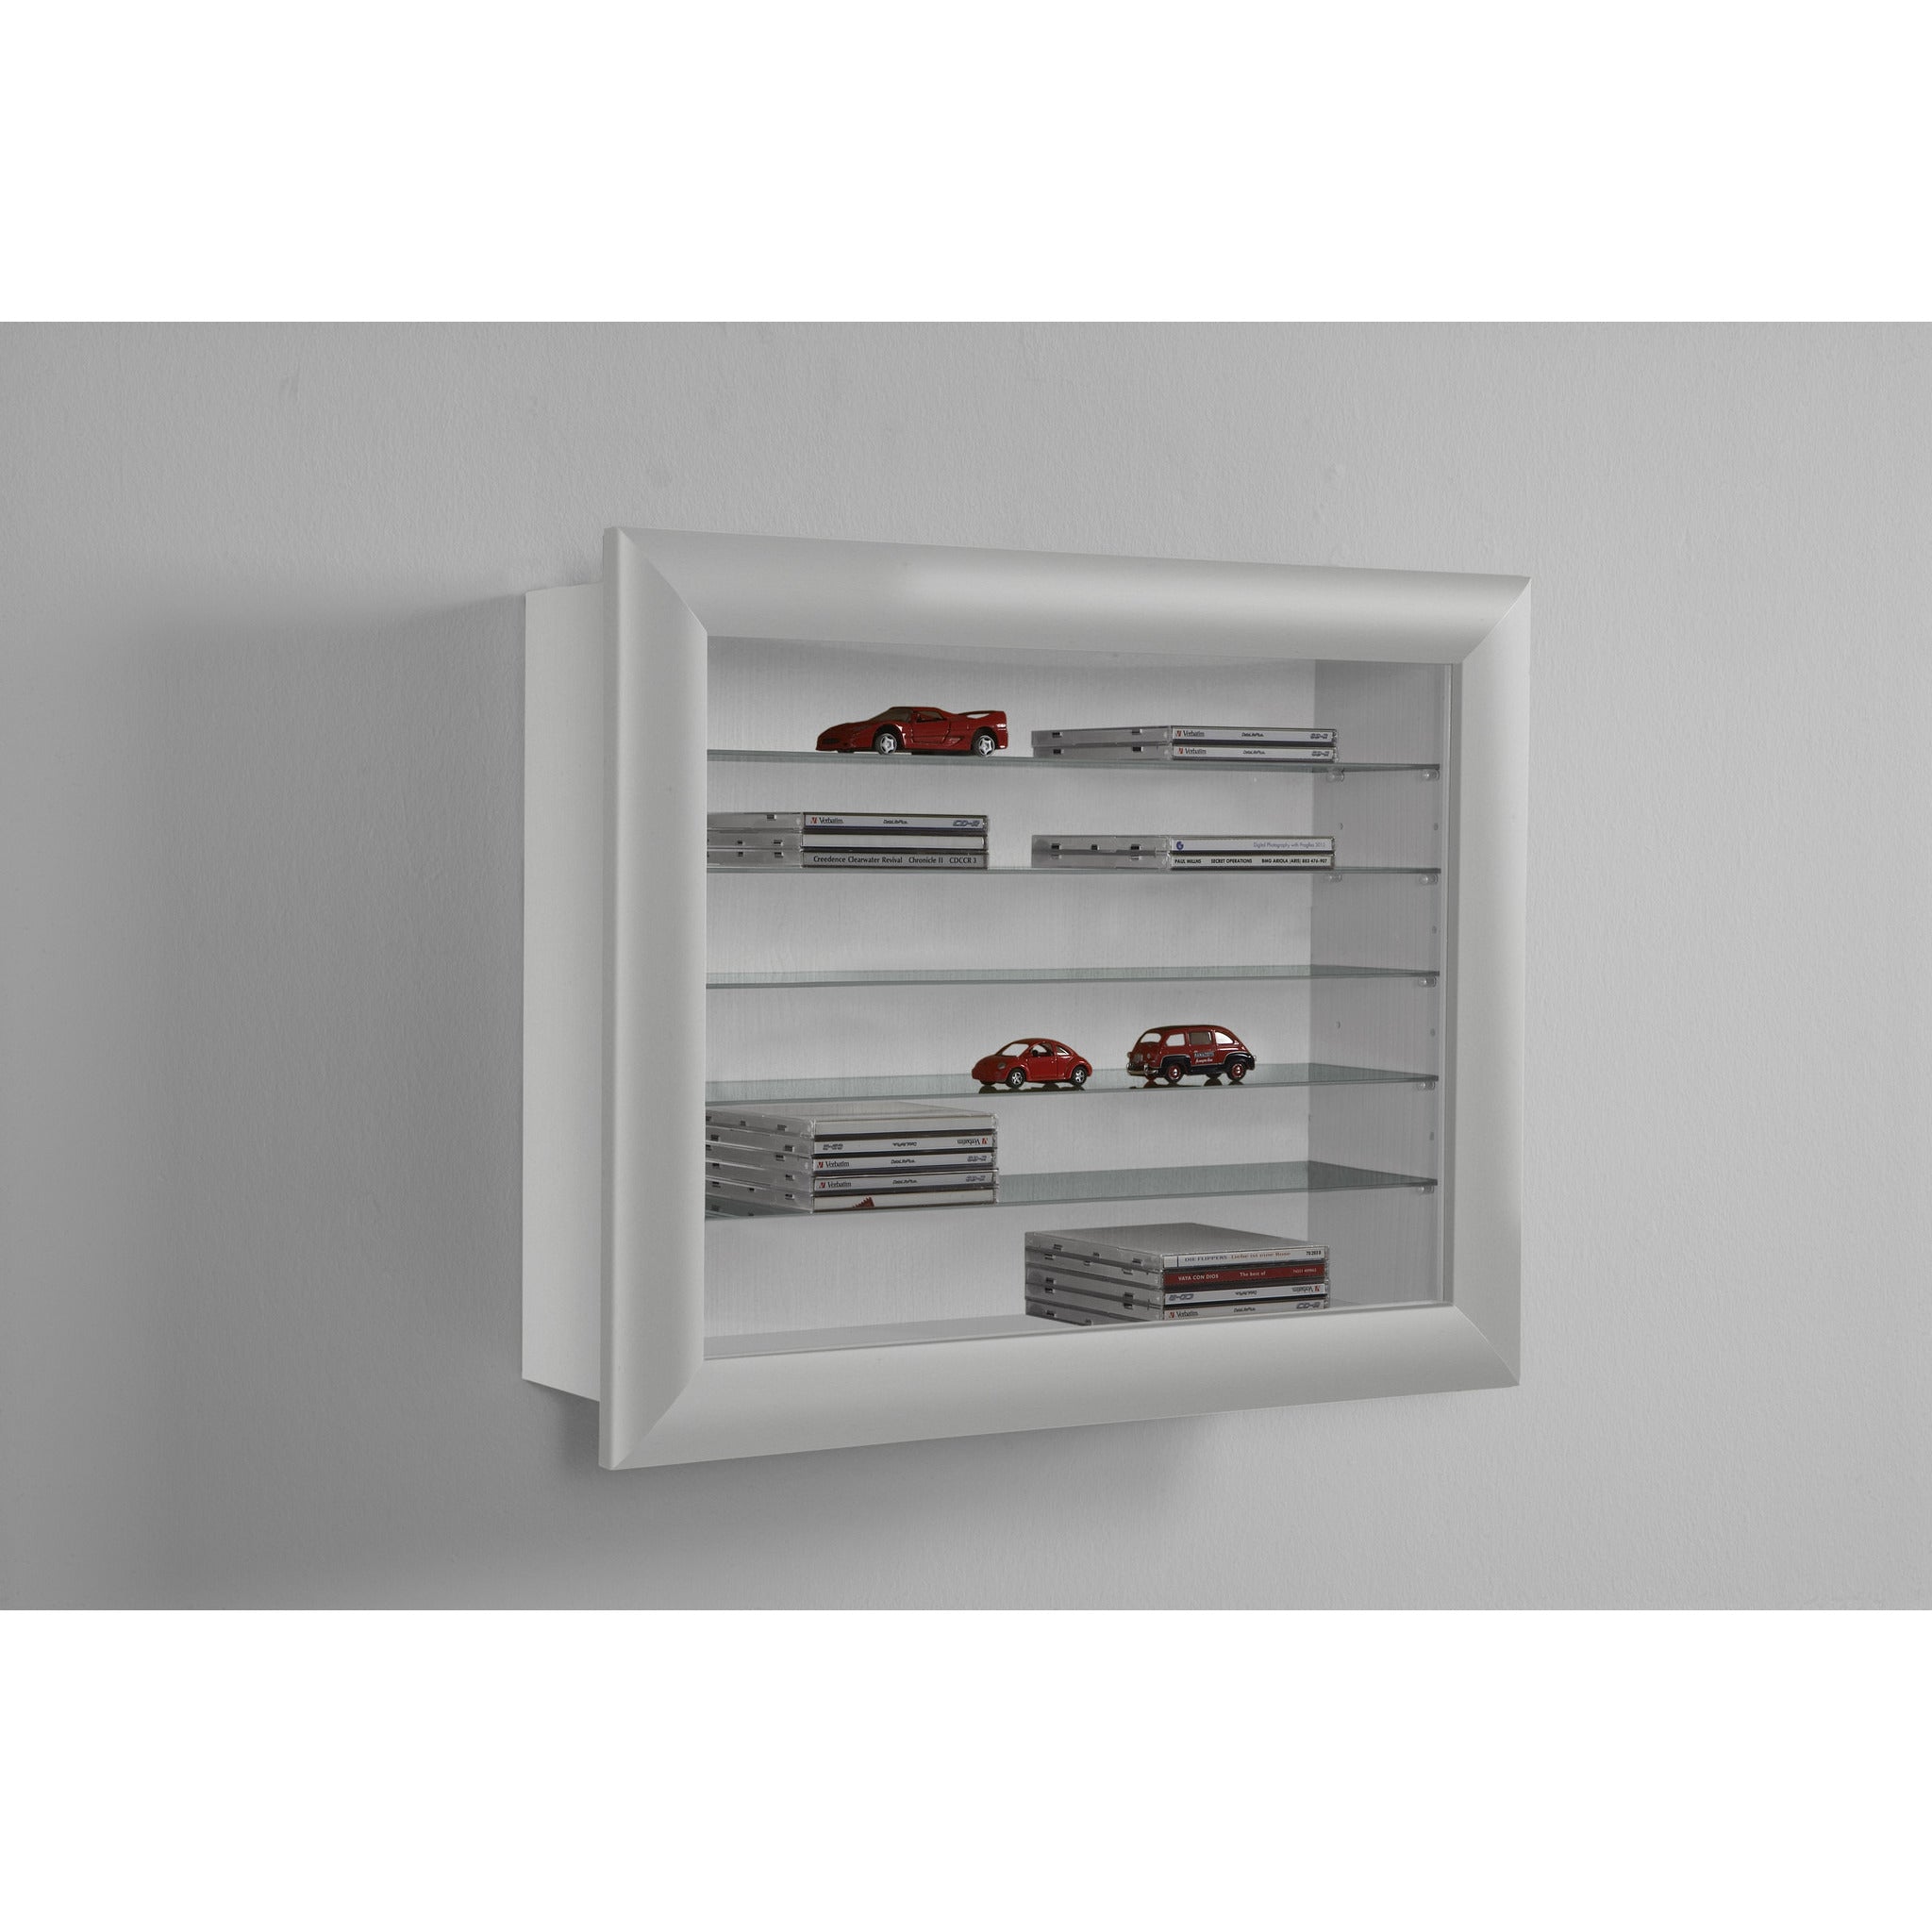 Bora 10 Wall Mounted Display Cabinet Shelving Ideal For